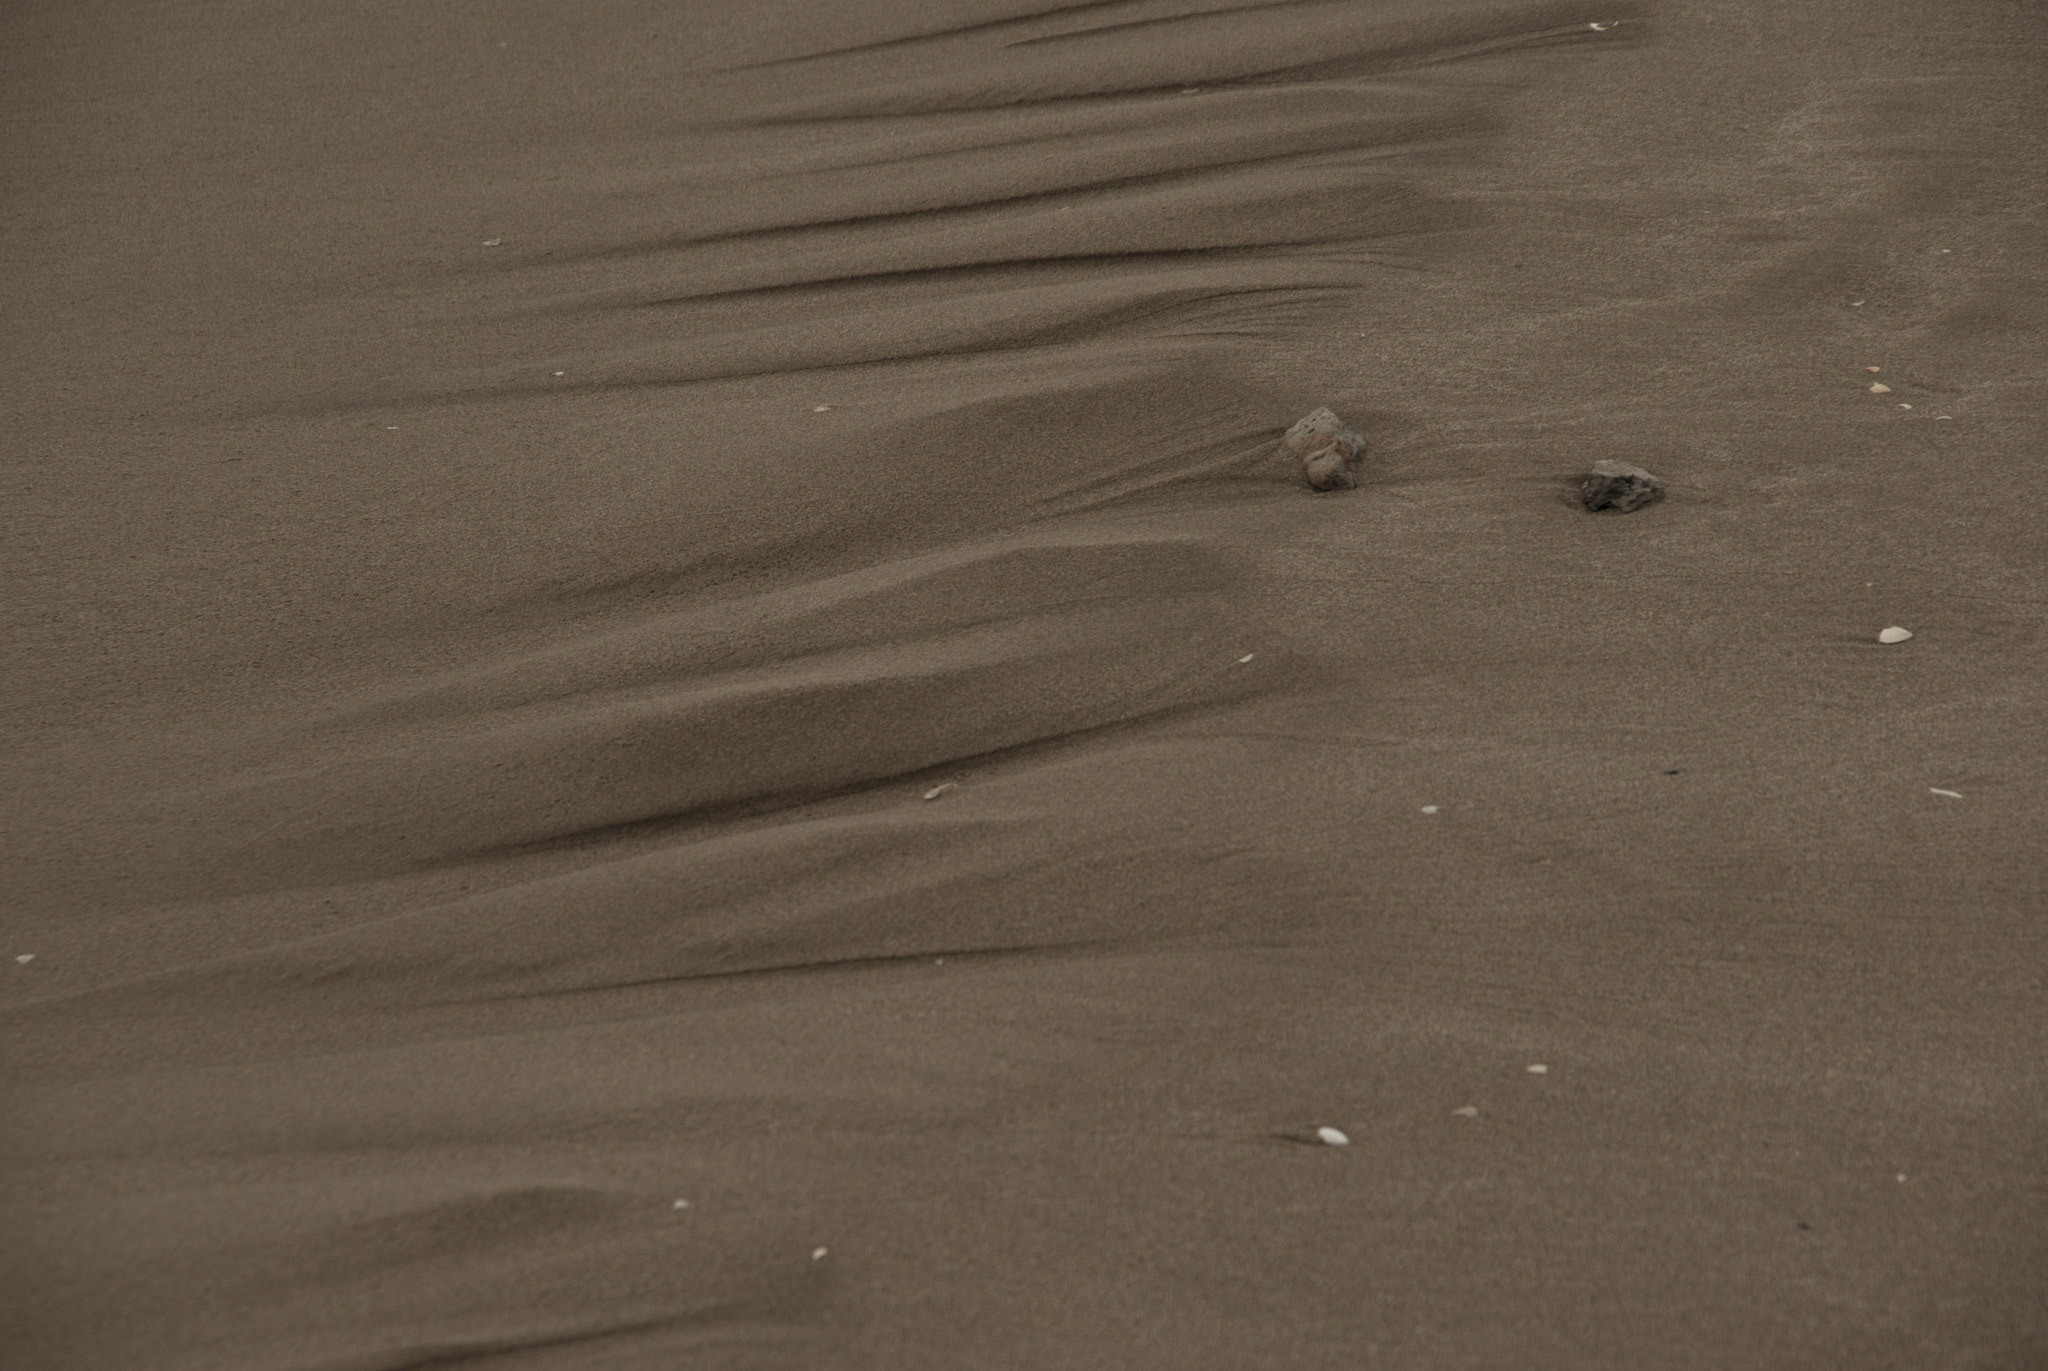 Pentax K10D sample photo. Small dunes in sand photography